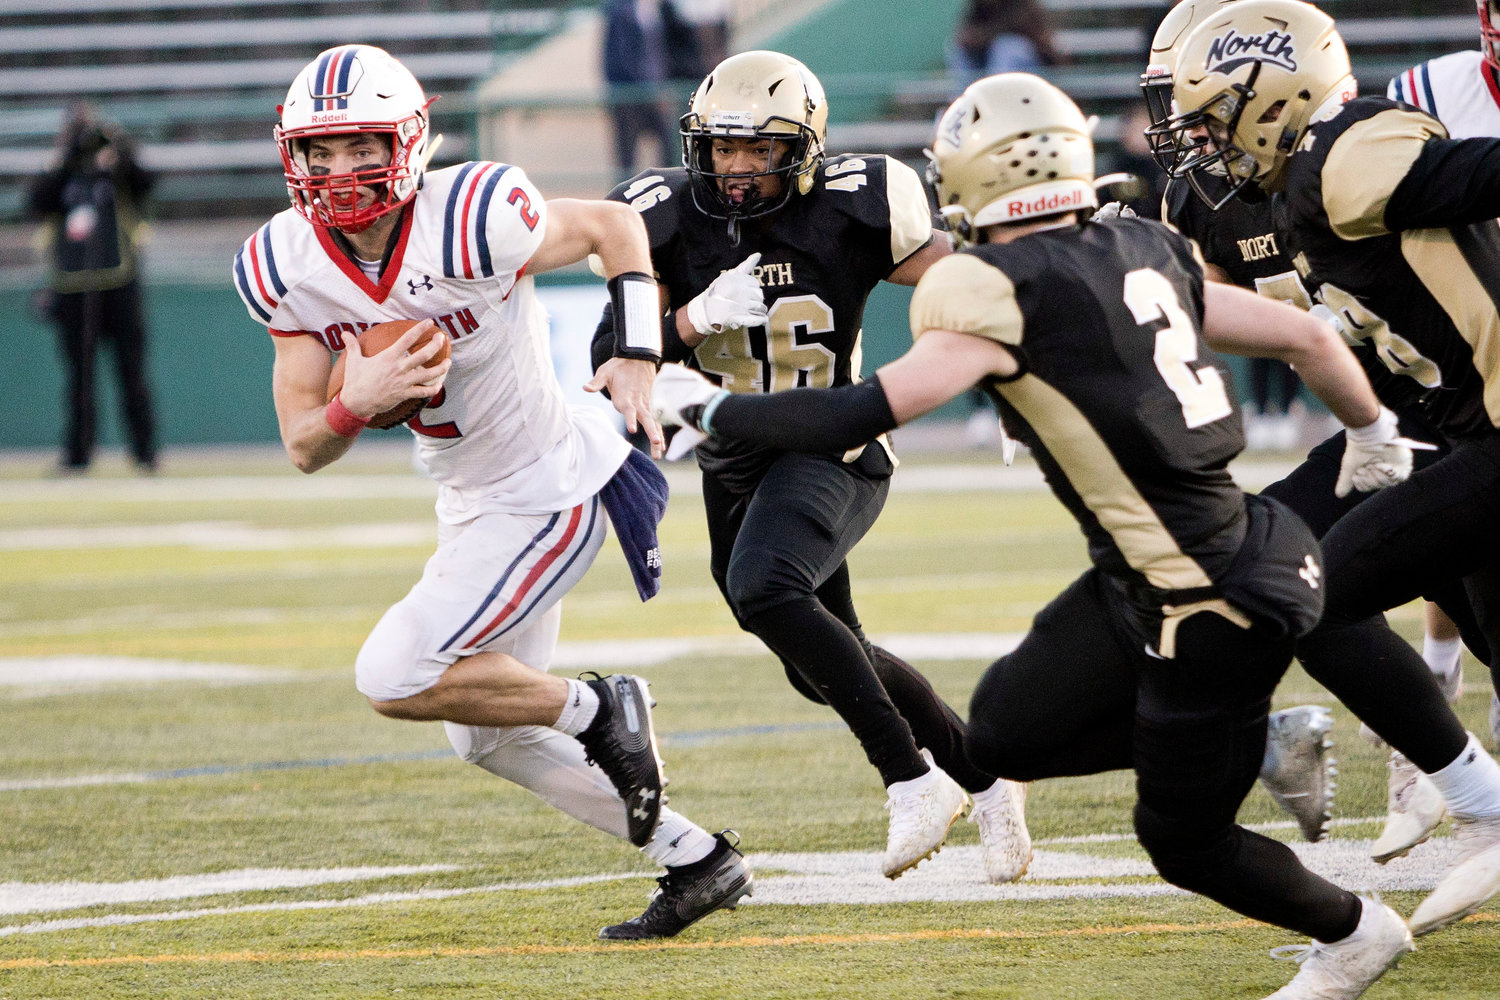 Benny Hurd runs away from the North Kingstown defense while carrying the ball for Portsmouth.